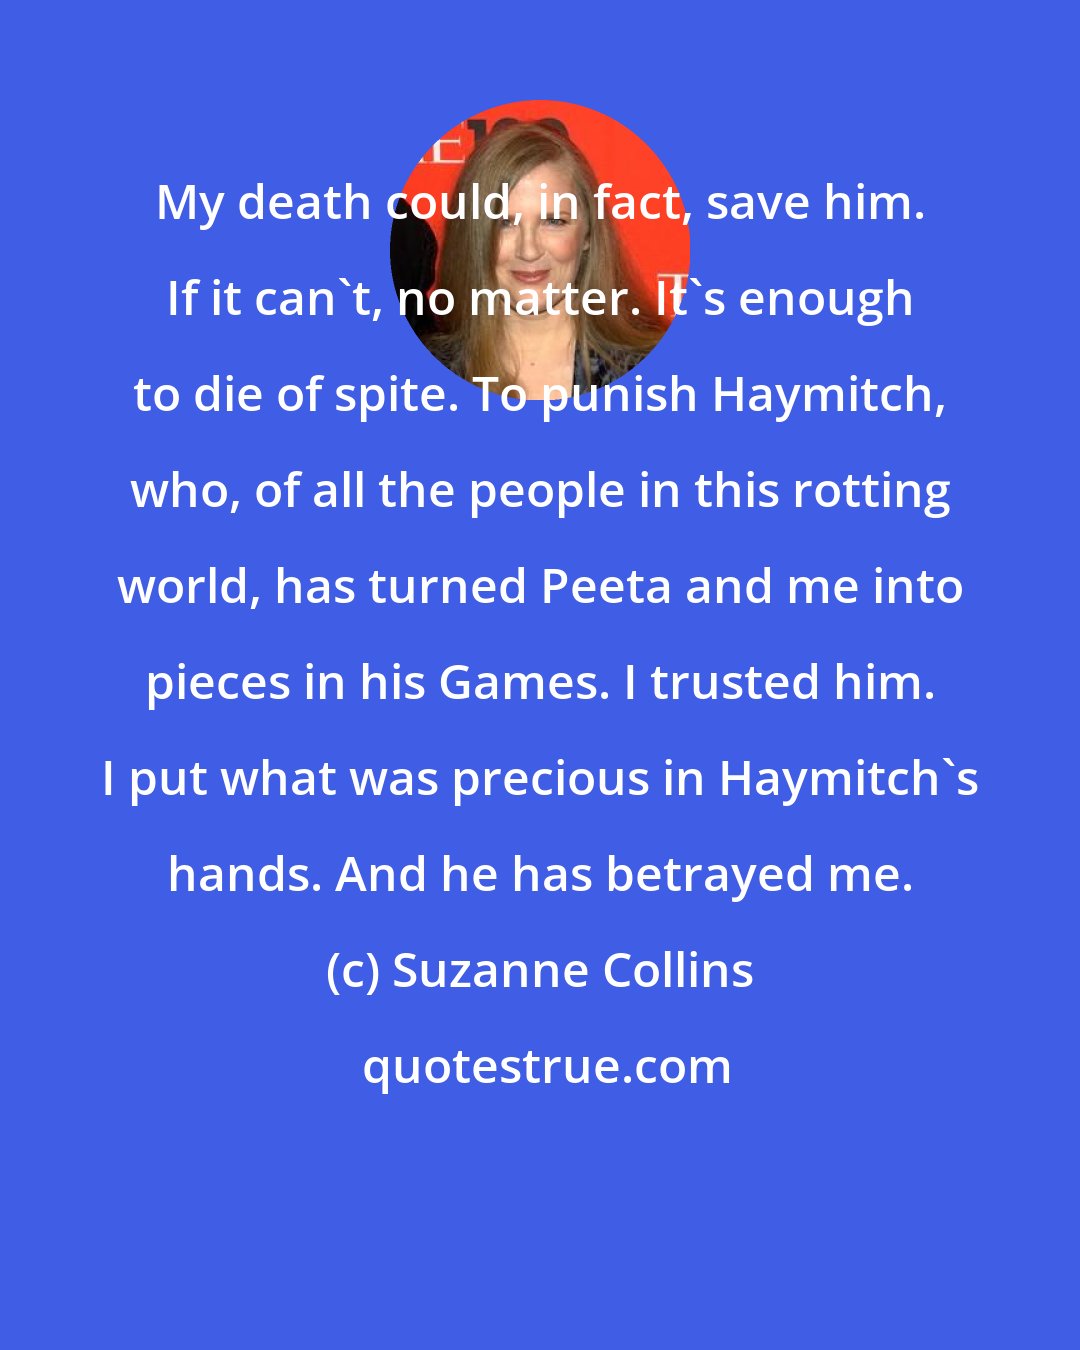 Suzanne Collins: My death could, in fact, save him. If it can't, no matter. It's enough to die of spite. To punish Haymitch, who, of all the people in this rotting world, has turned Peeta and me into pieces in his Games. I trusted him. I put what was precious in Haymitch's hands. And he has betrayed me.